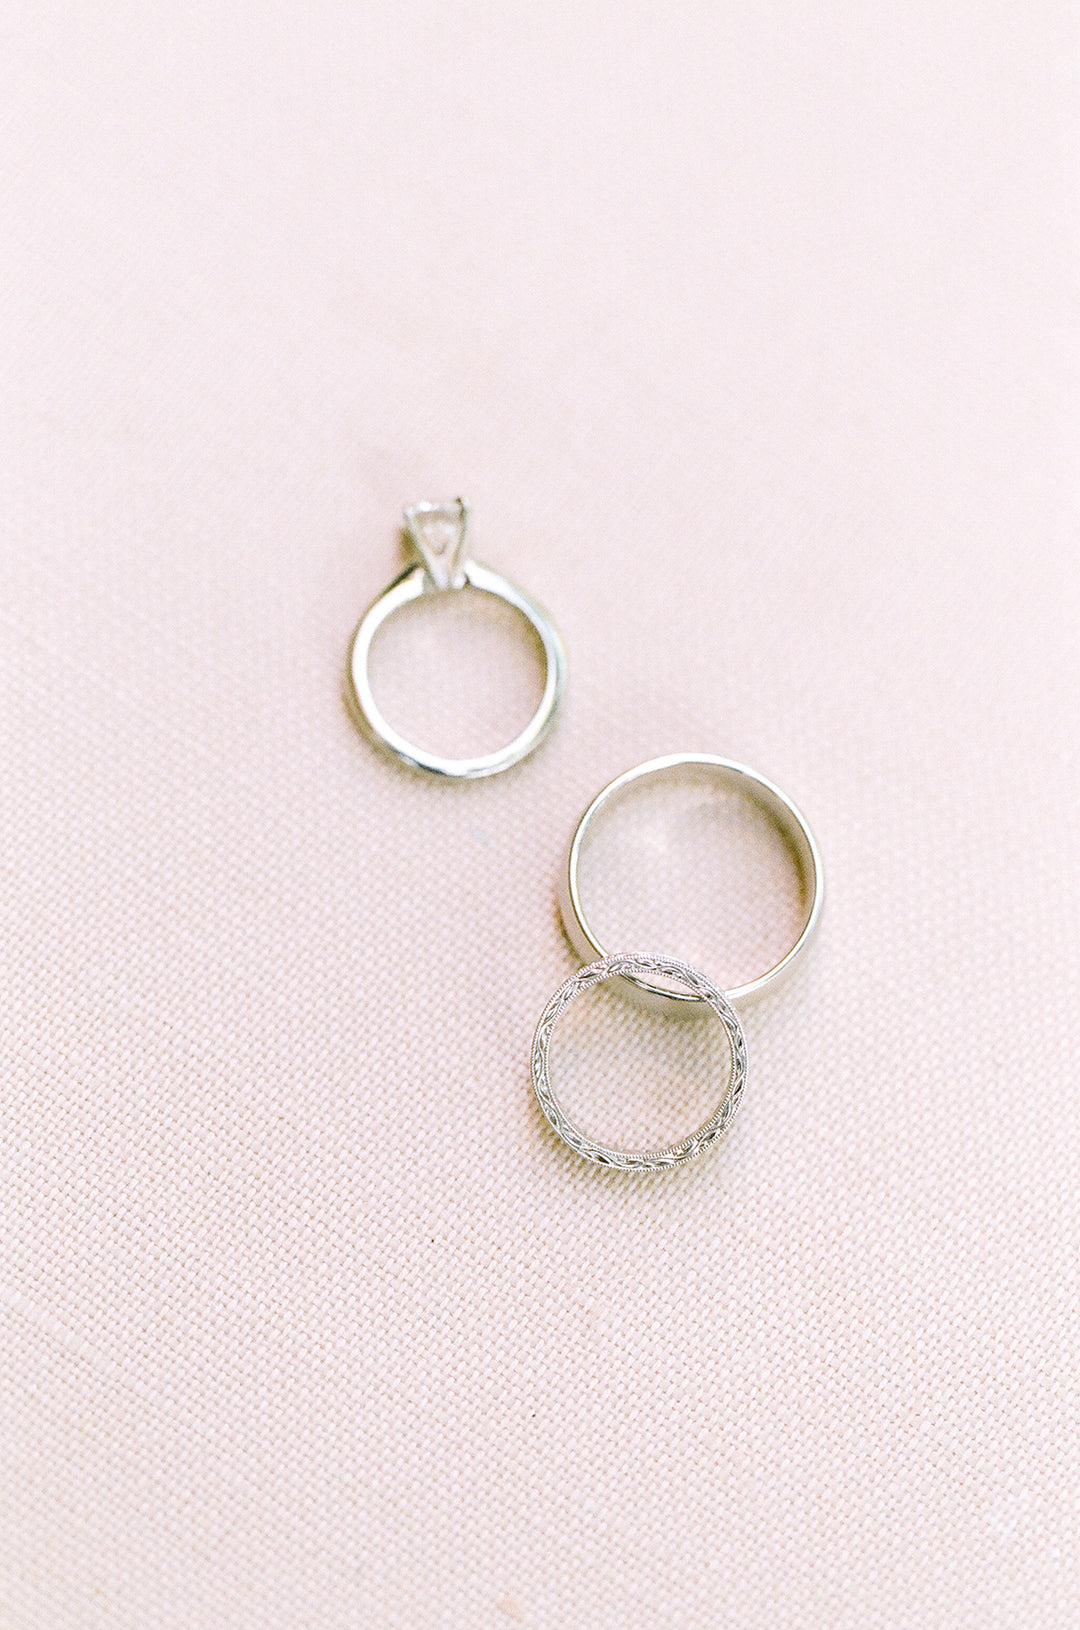 photo of two wedding bands and an engagement ring sitting on top of a pale pink background